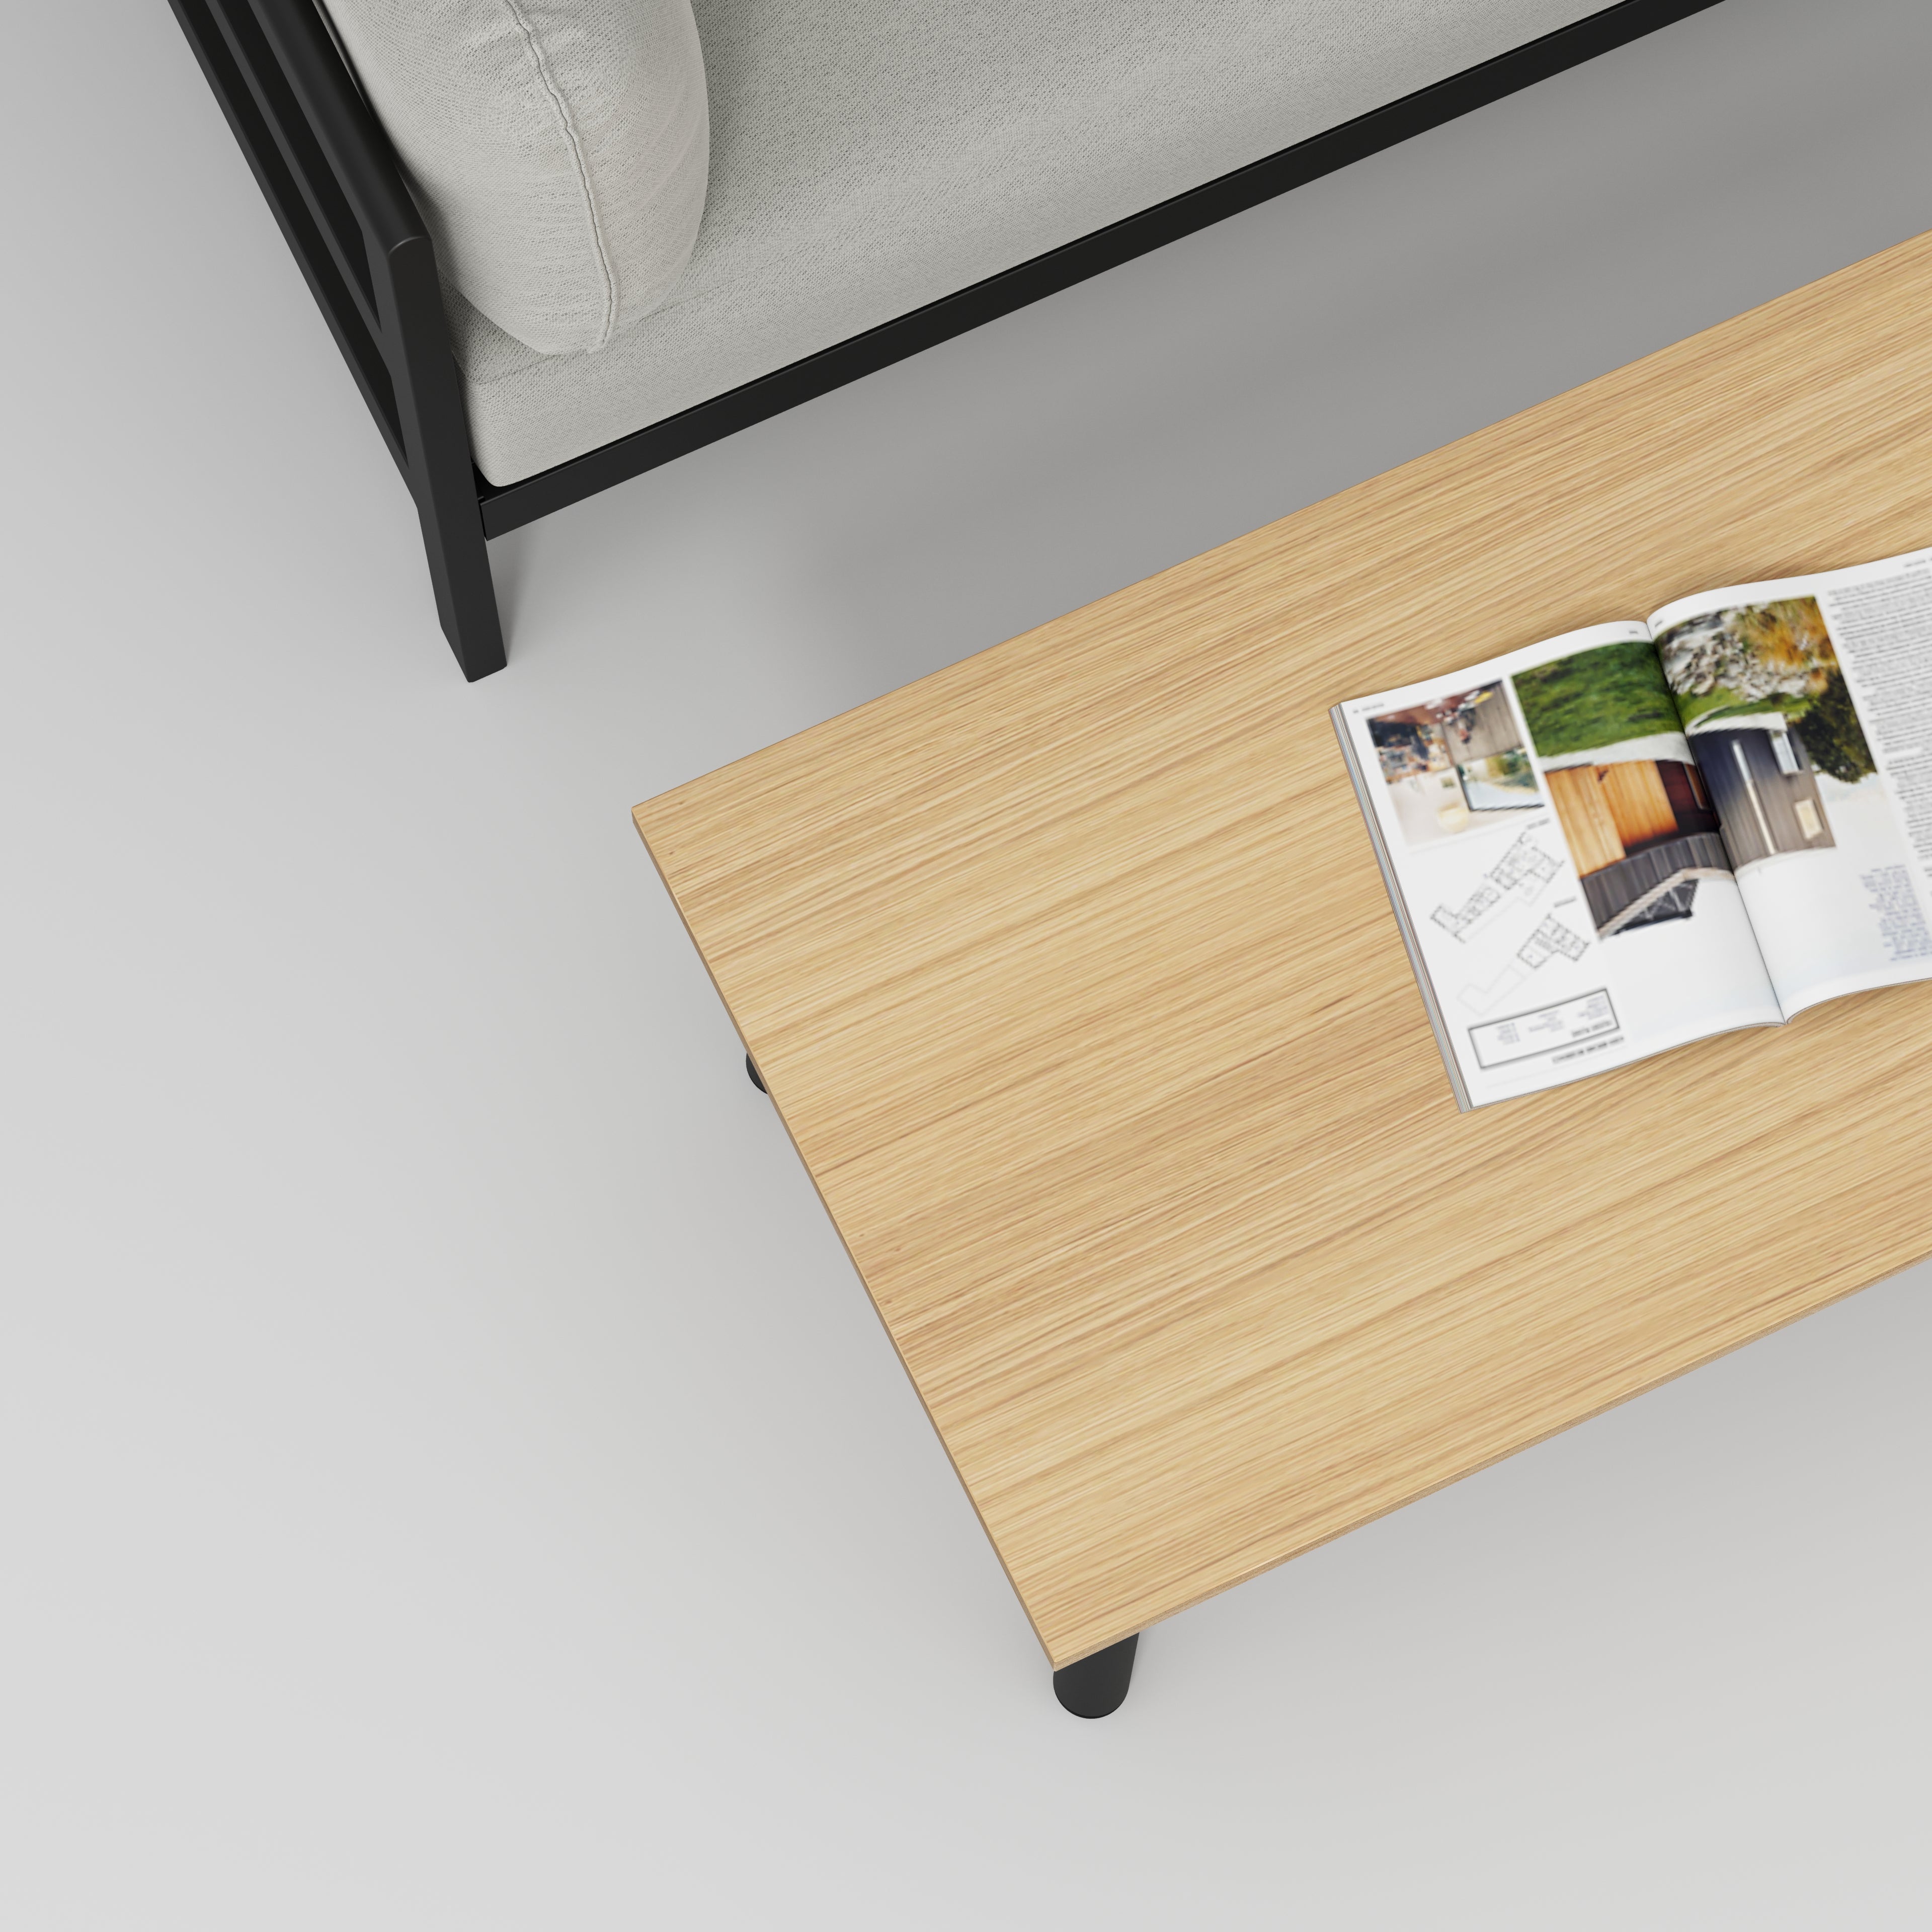 Coffee Table with Black Round Single Pin Legs - Plywood Oak - 1200(w) x 600(d) x 425(h)